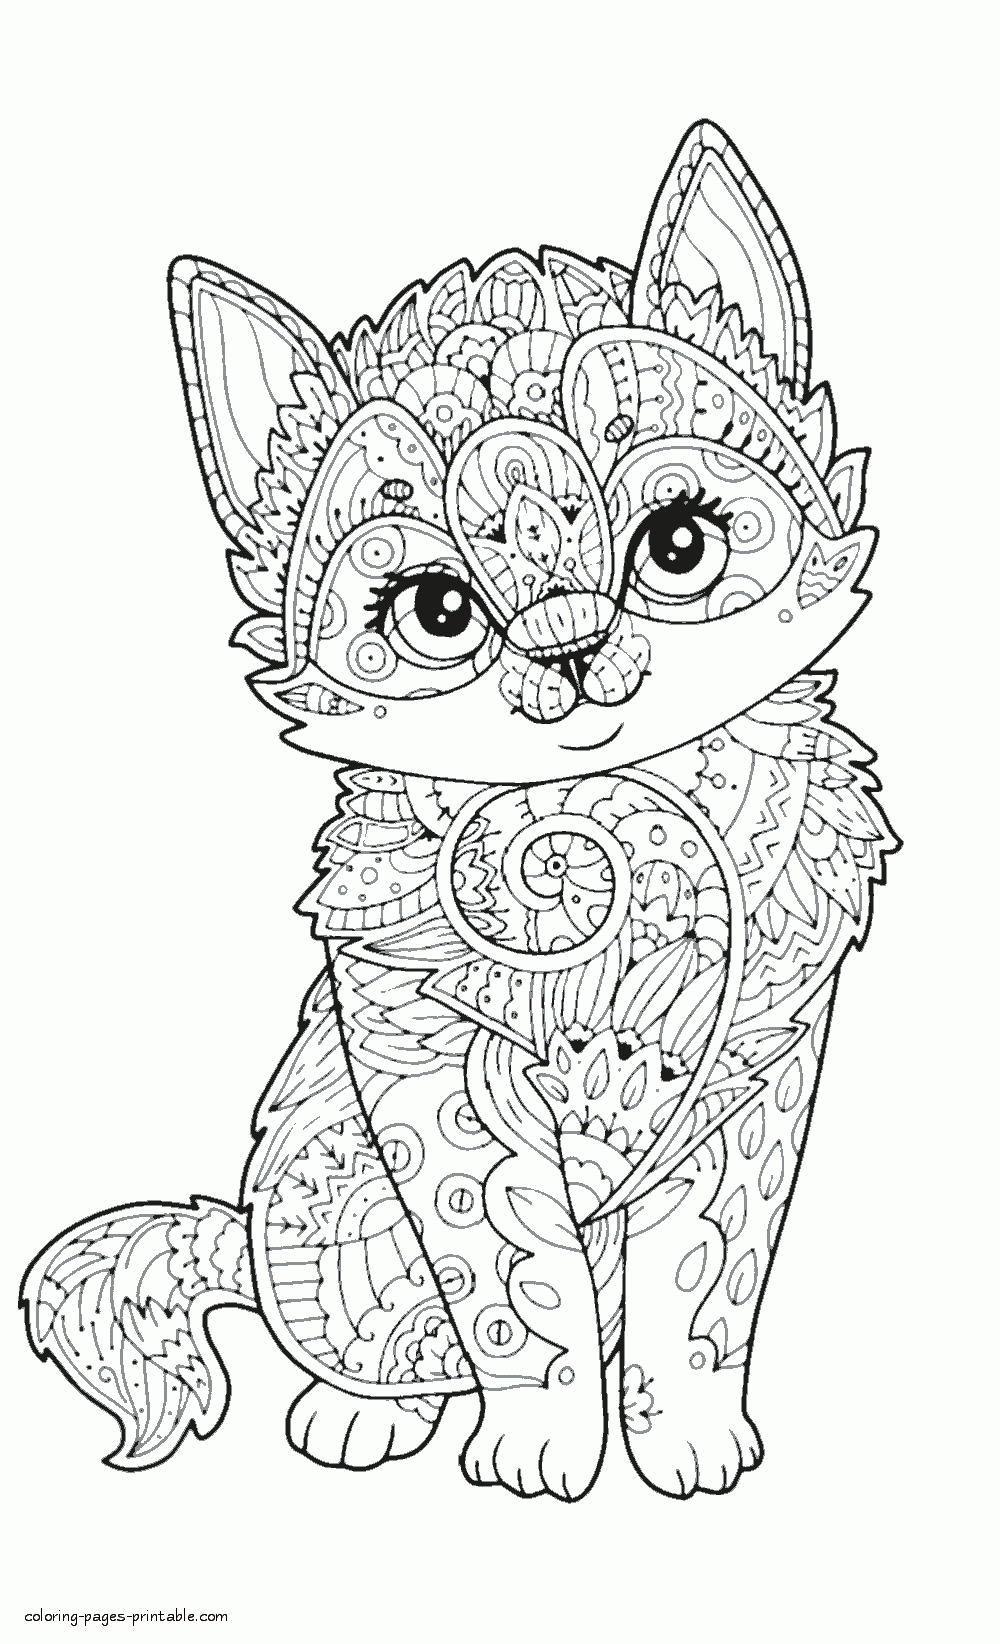 Pollinate Thermal Injection animal coloring pages for adults to ...